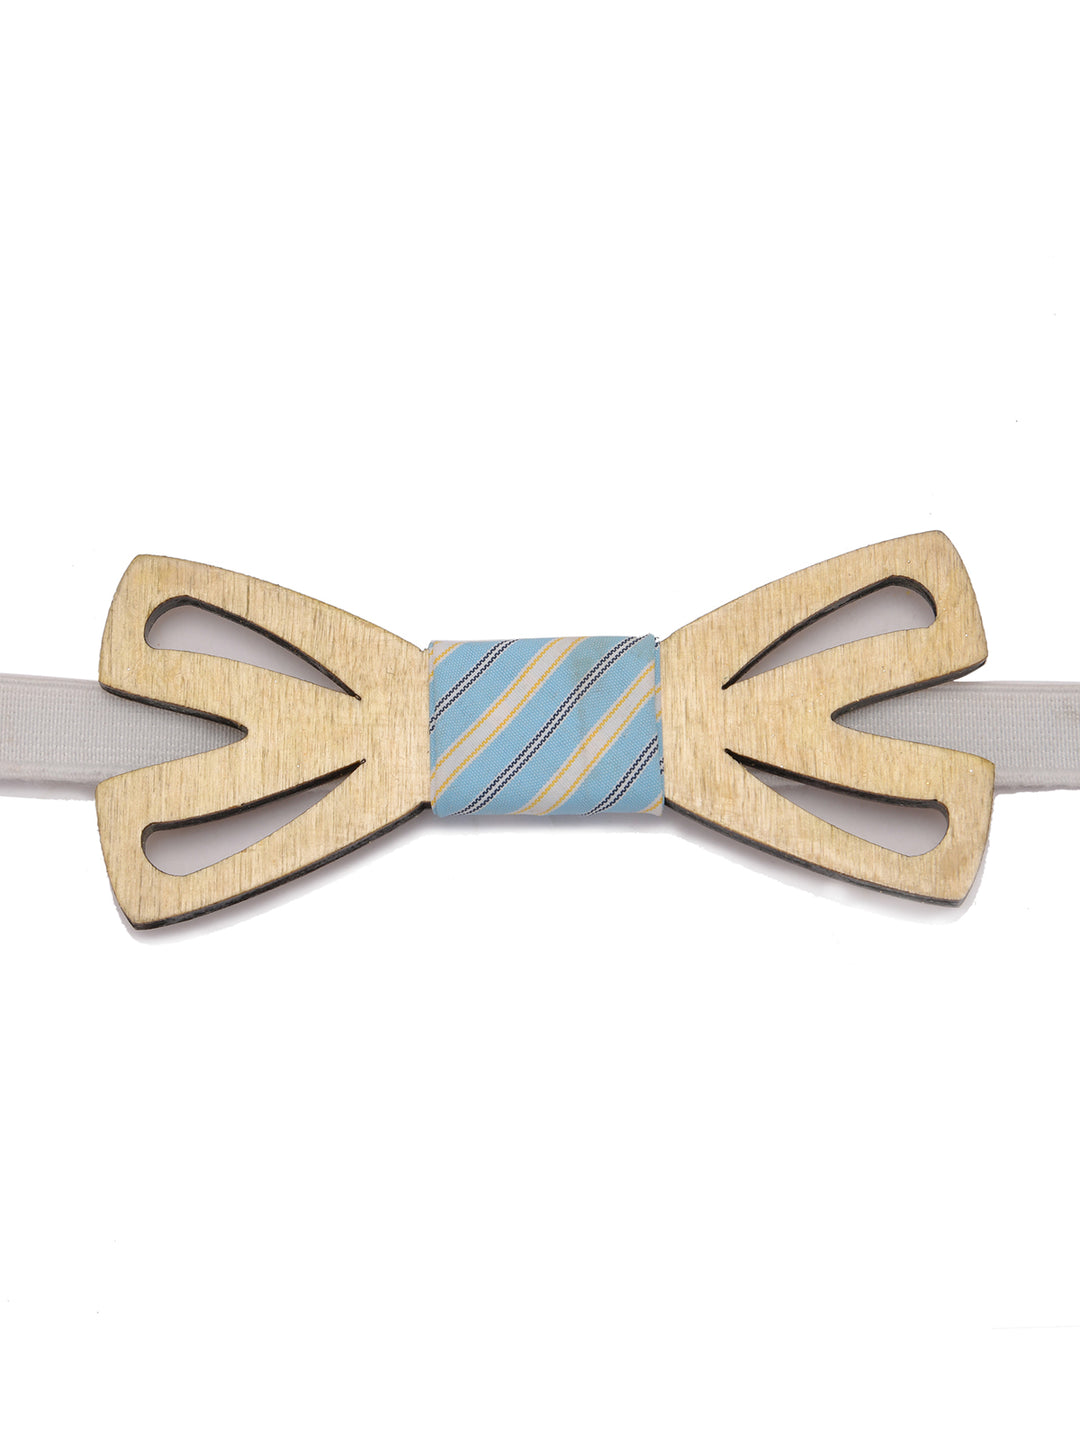 Classic Wooden Bow Tie | The Engraved Store